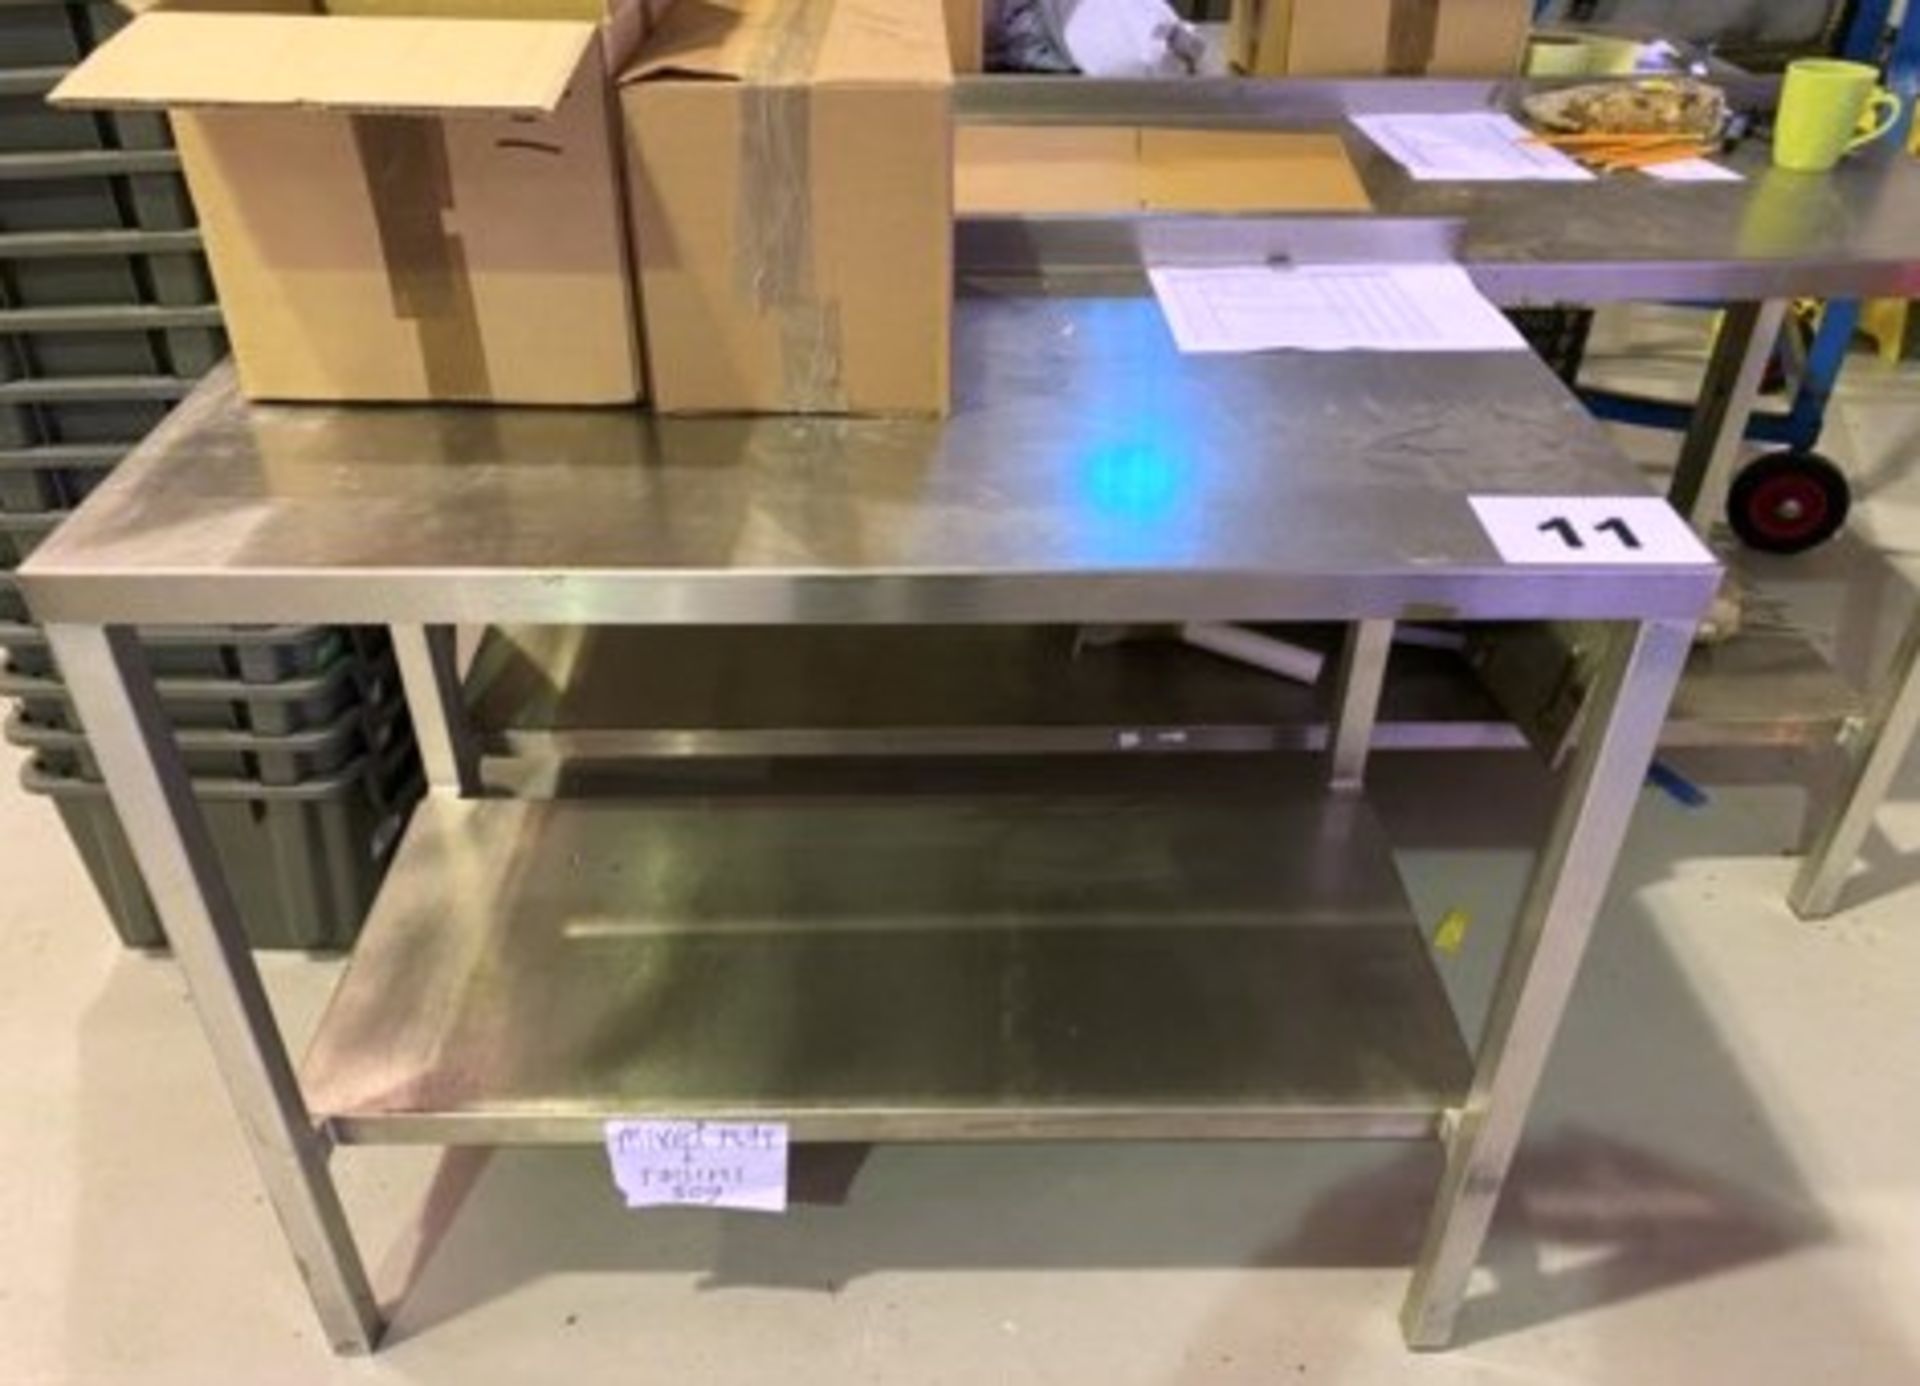 STAINLESS STEEL TABLE WITH SHELVING. LO £10